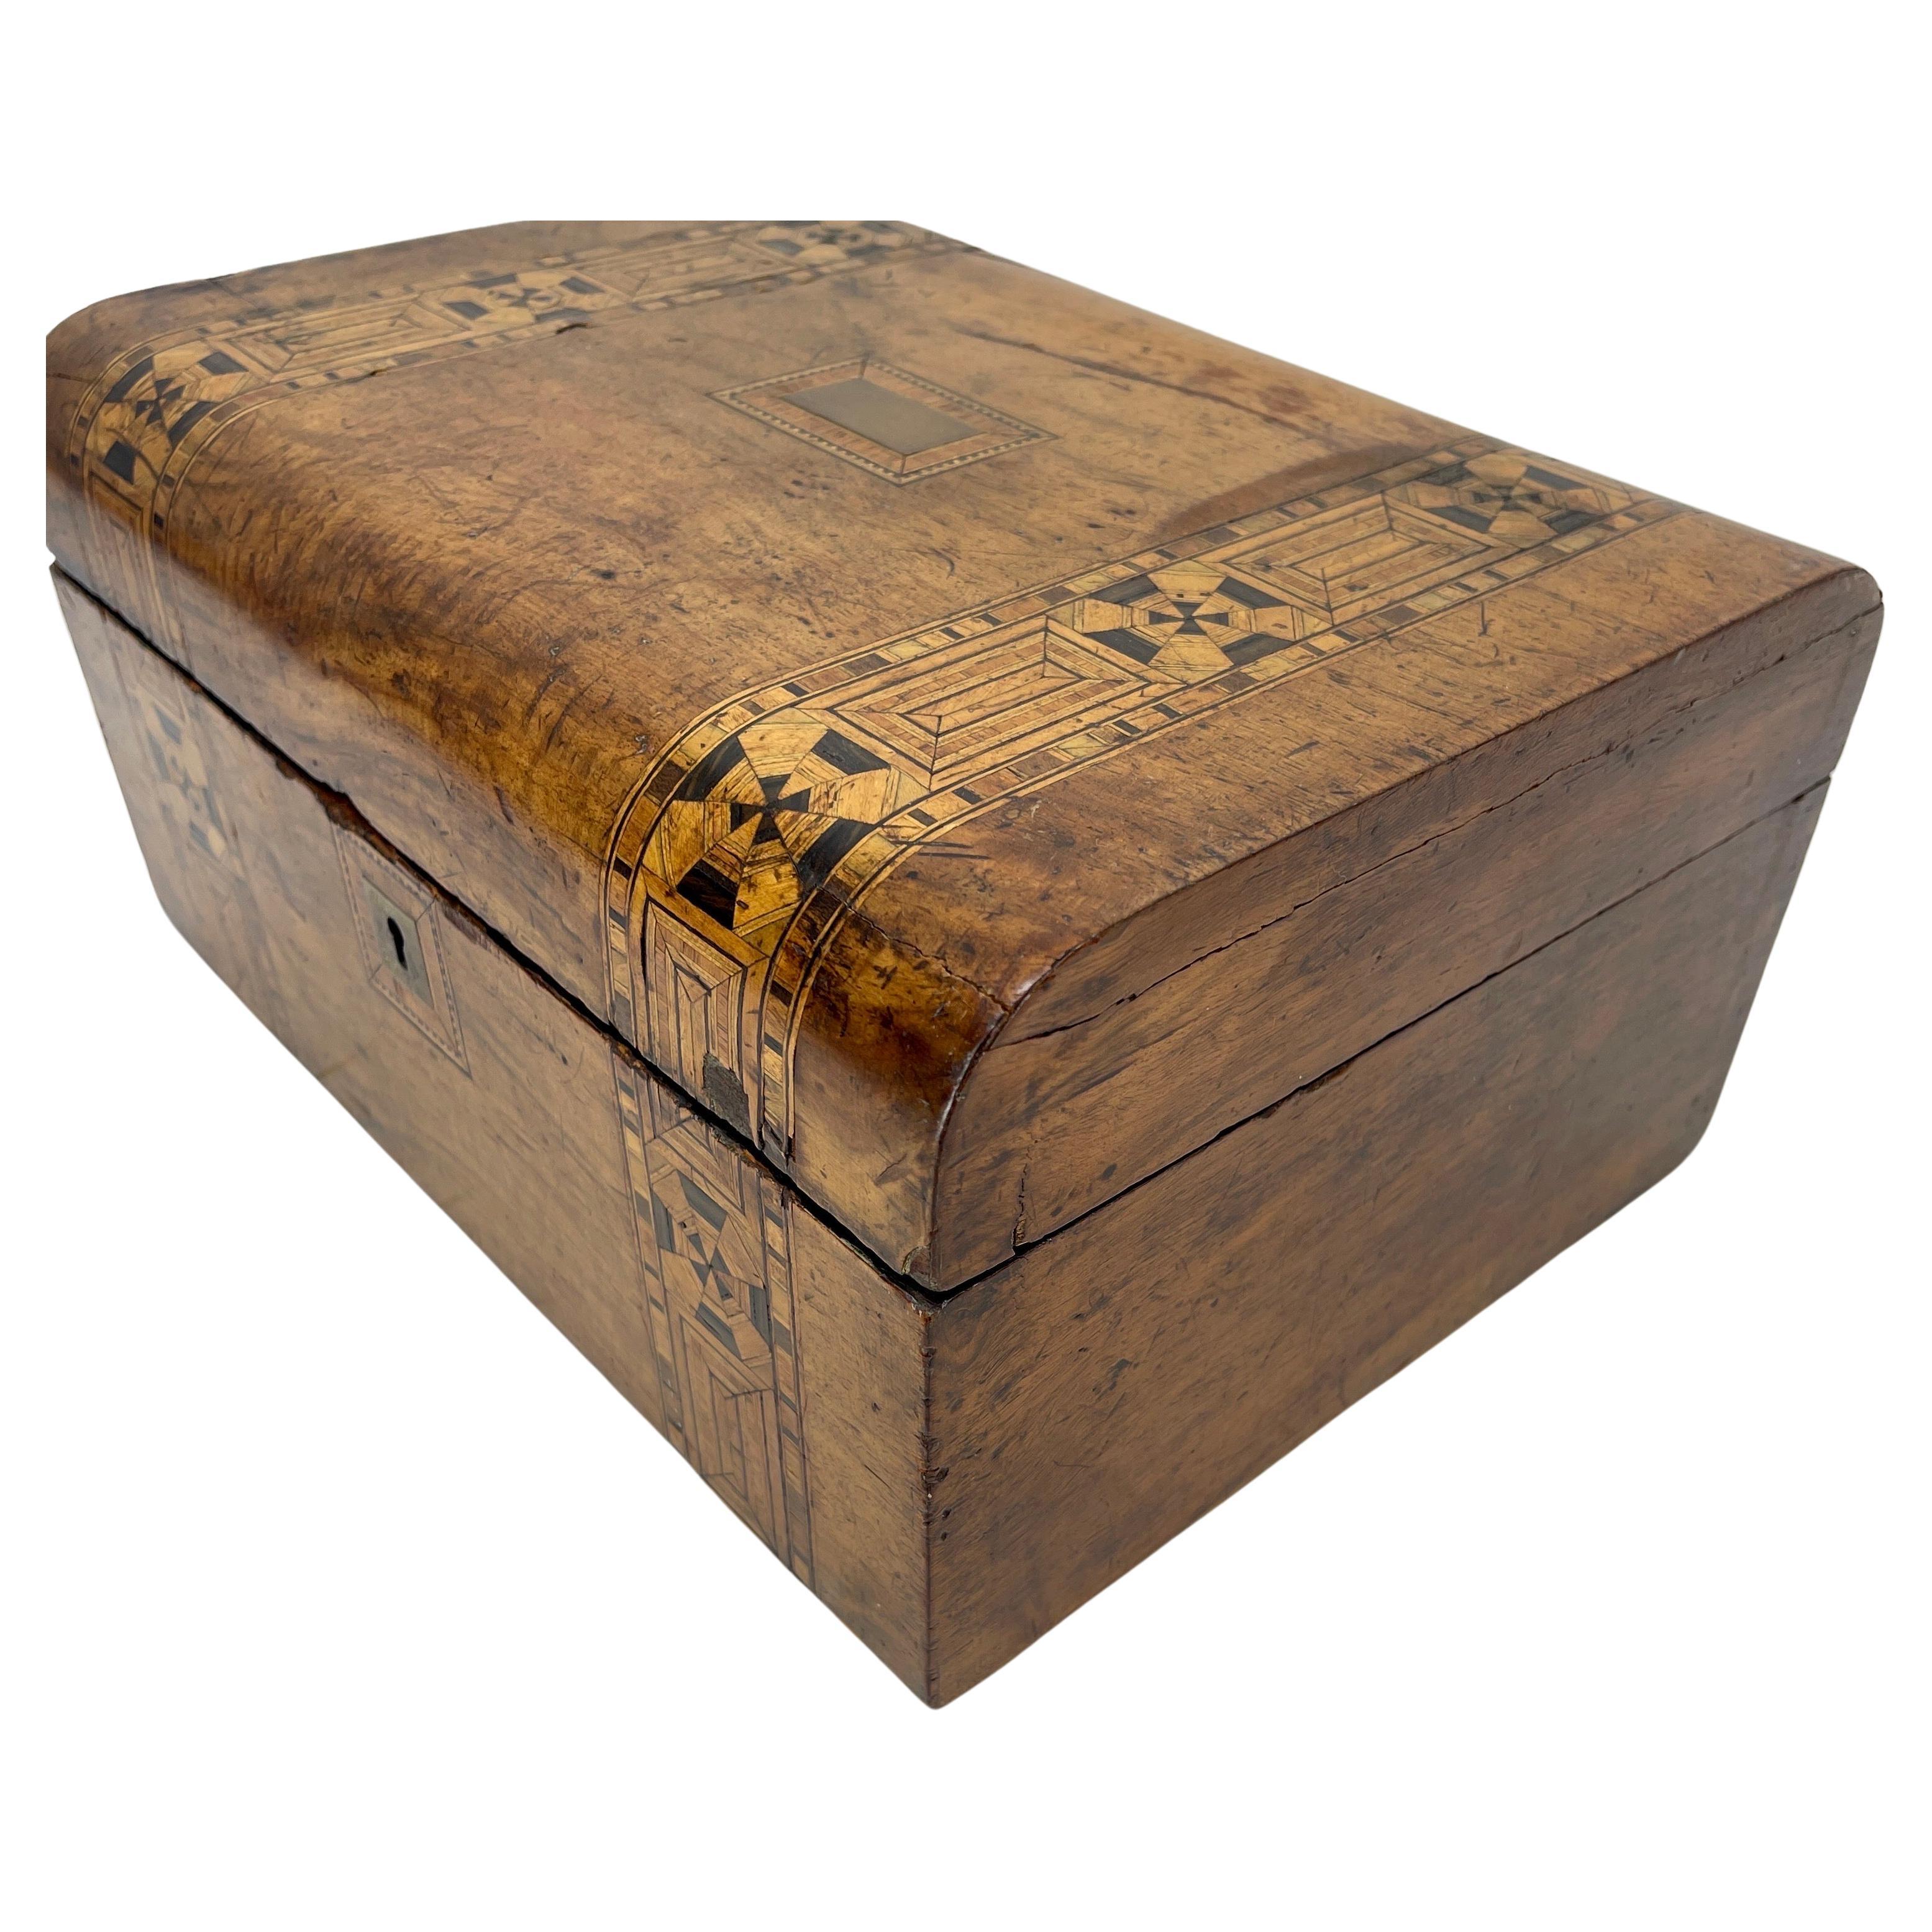 Hand-Crafted Swedish Inlaid Fruitwood and Veneered Box with Curved Top Early 19th Century For Sale